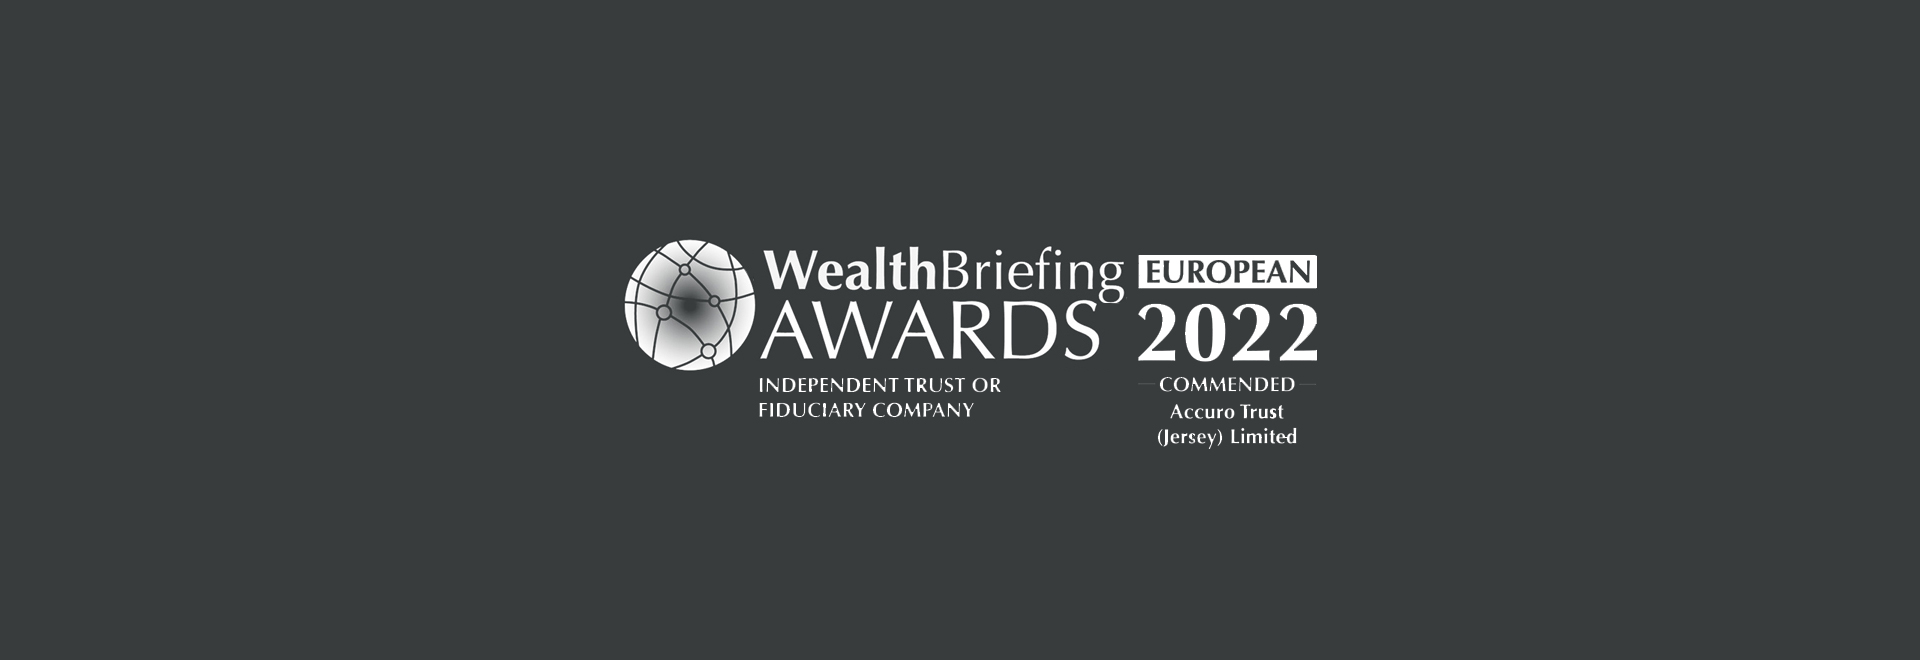 Accuro rewarded “Highly commended” independent trust or fiduciary company at the tenth Wealthbriefing European awards 2022